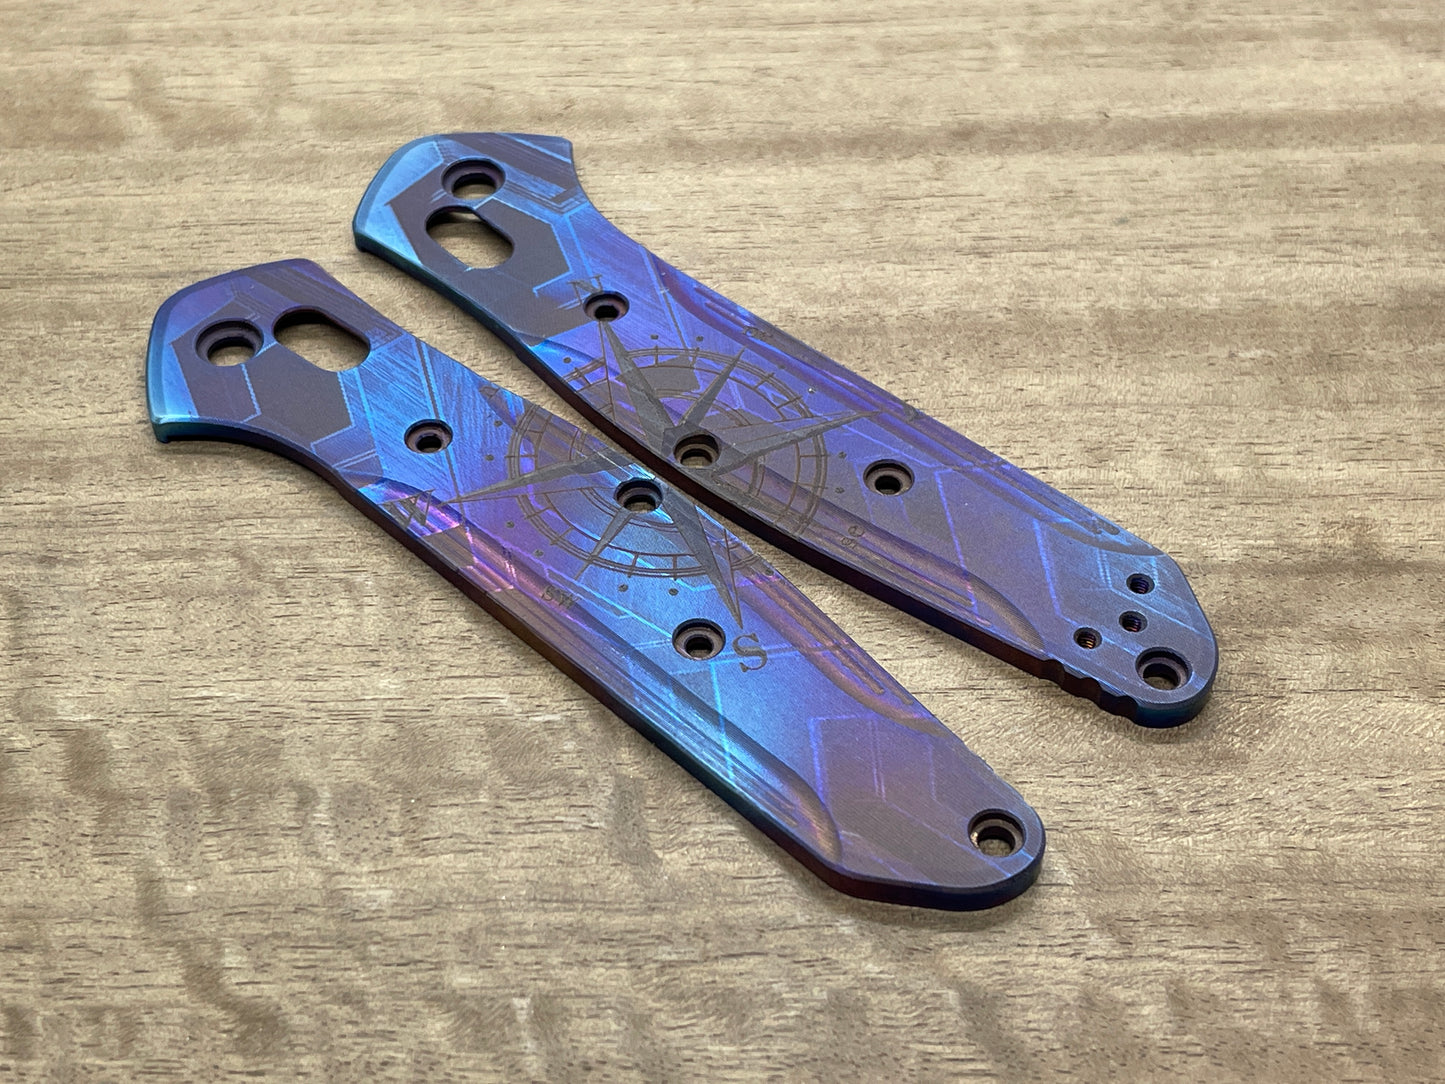 Flamed COMPASS engraved Titanium Scales for Benchmade 940 Osborne